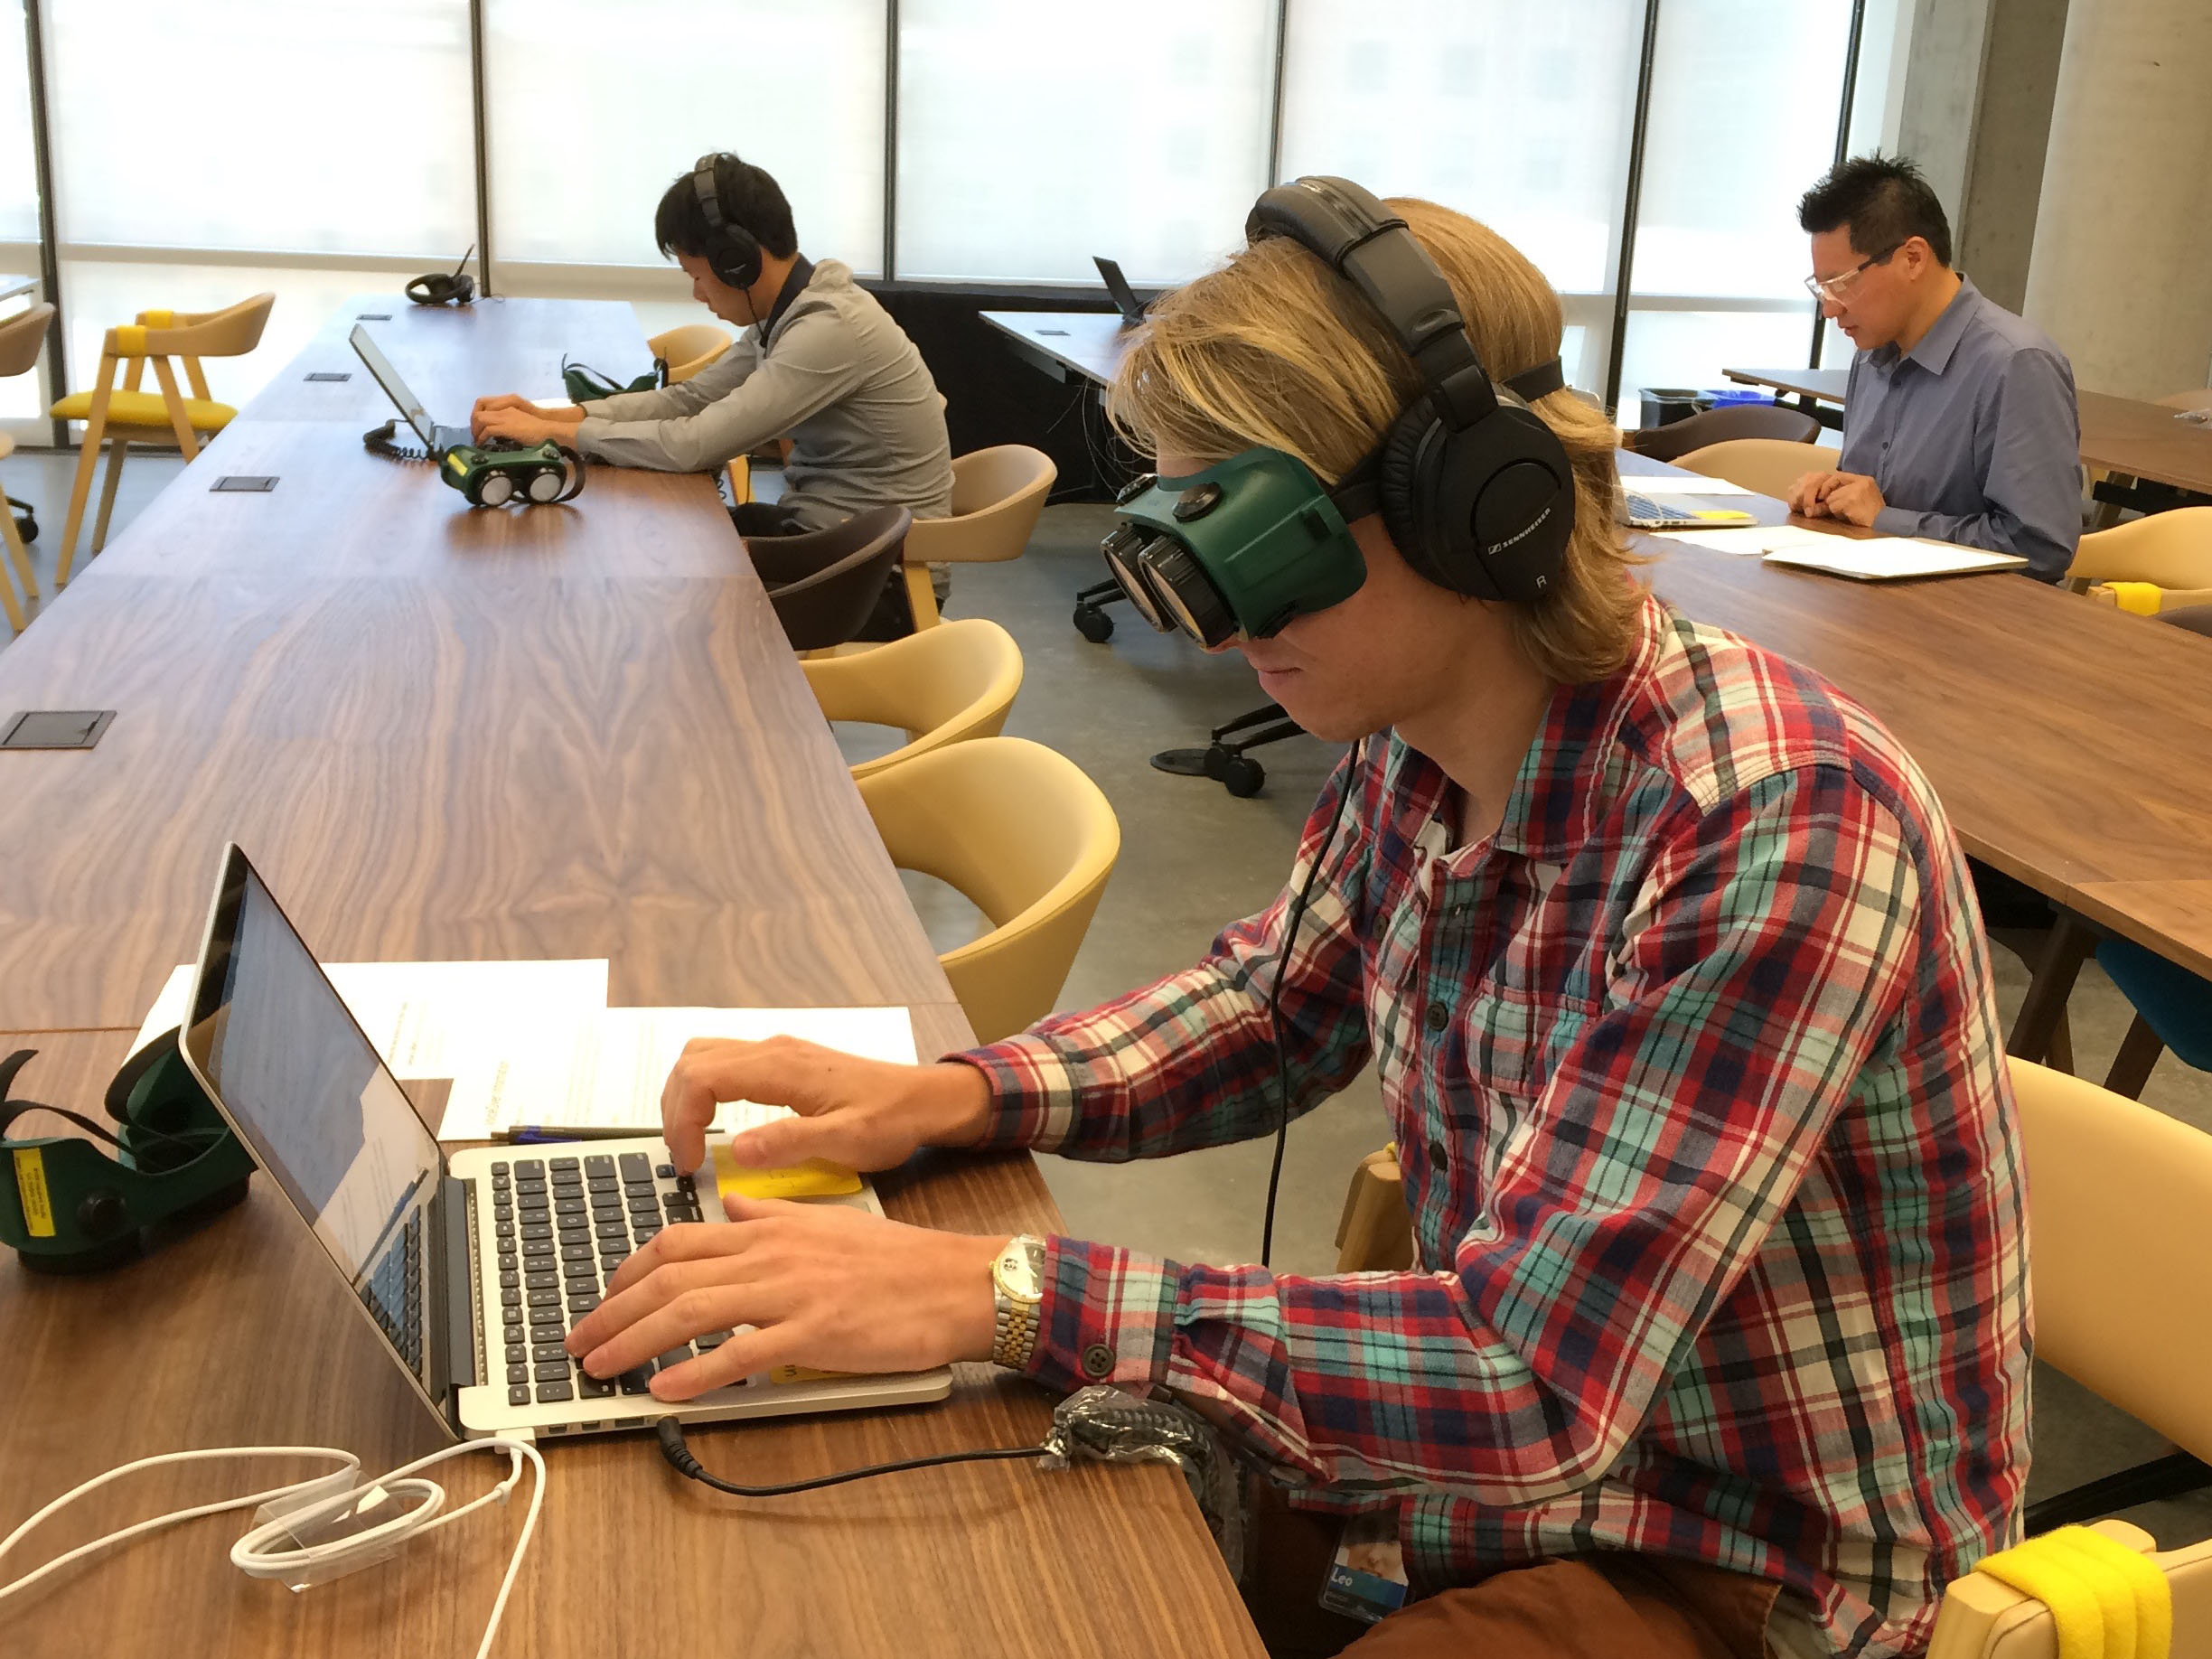 At another Assistive Technology Lab, someone wears headphones and special goggles that obscure their vision while they navigate dropbox.com with a screen reader.